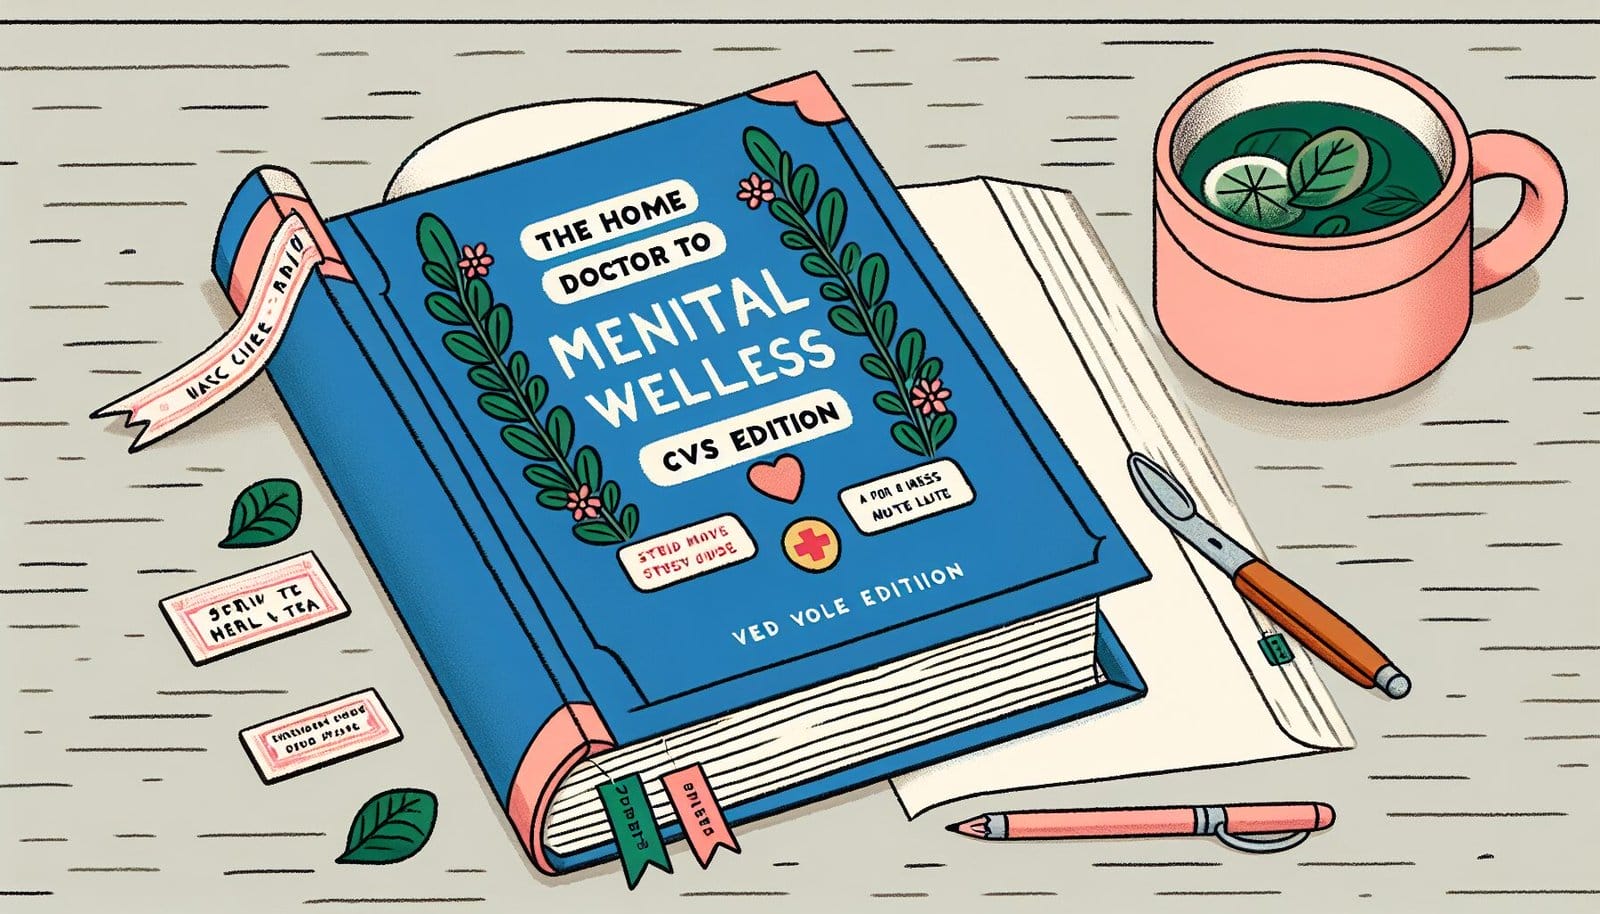 You are currently viewing The Home Doctor’s Guide to Mental Wellness – CVS Edition